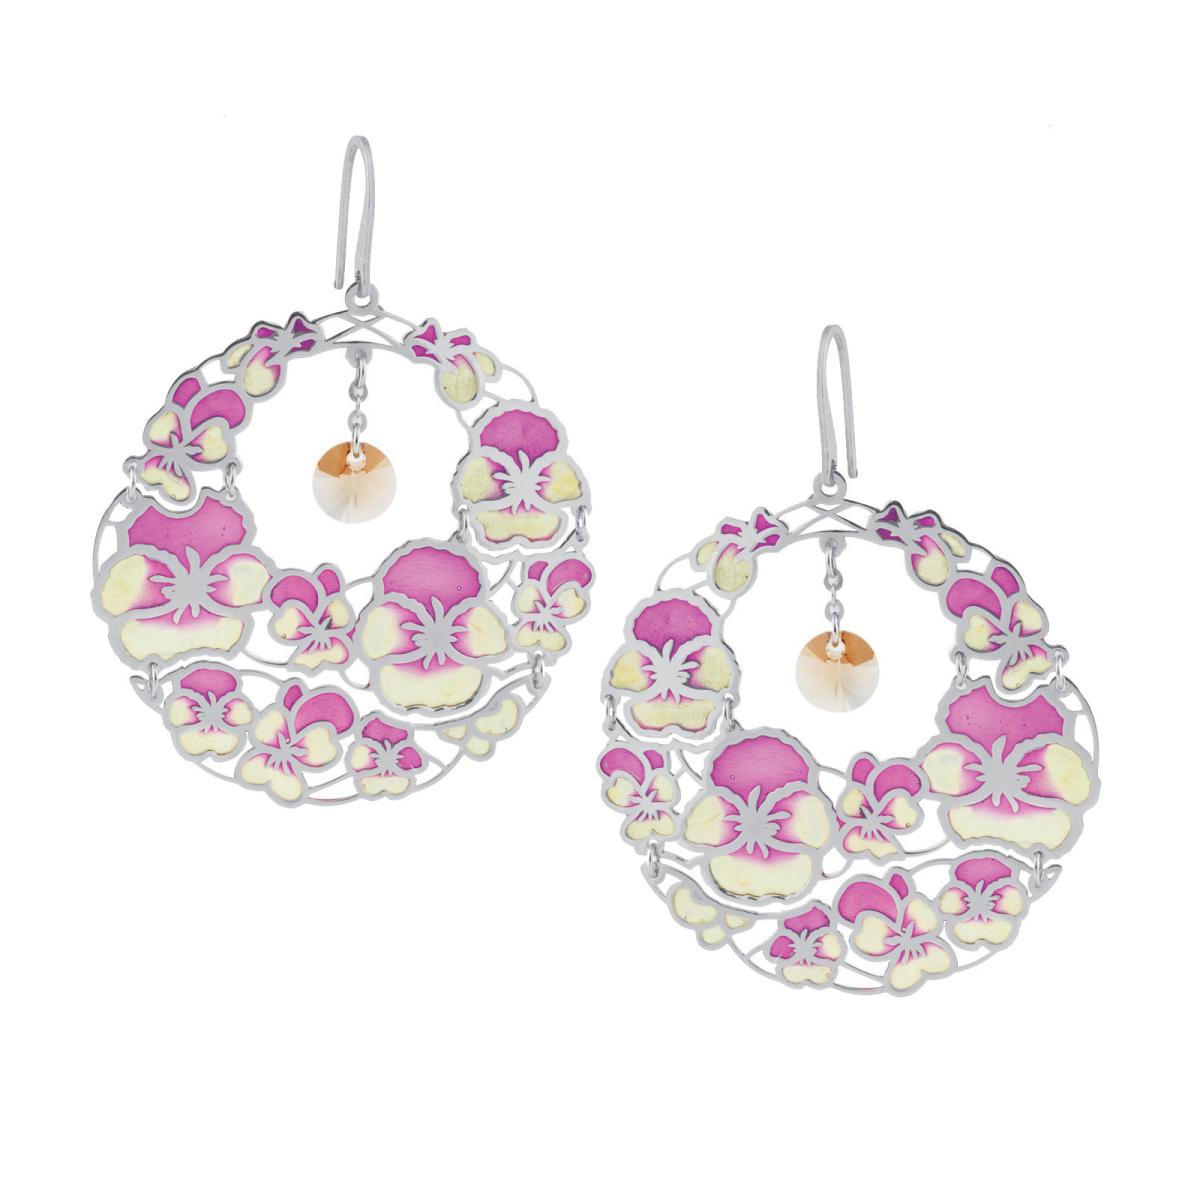 Rhodium plated silver earrings with cathedral enamels - ZOR774-MB